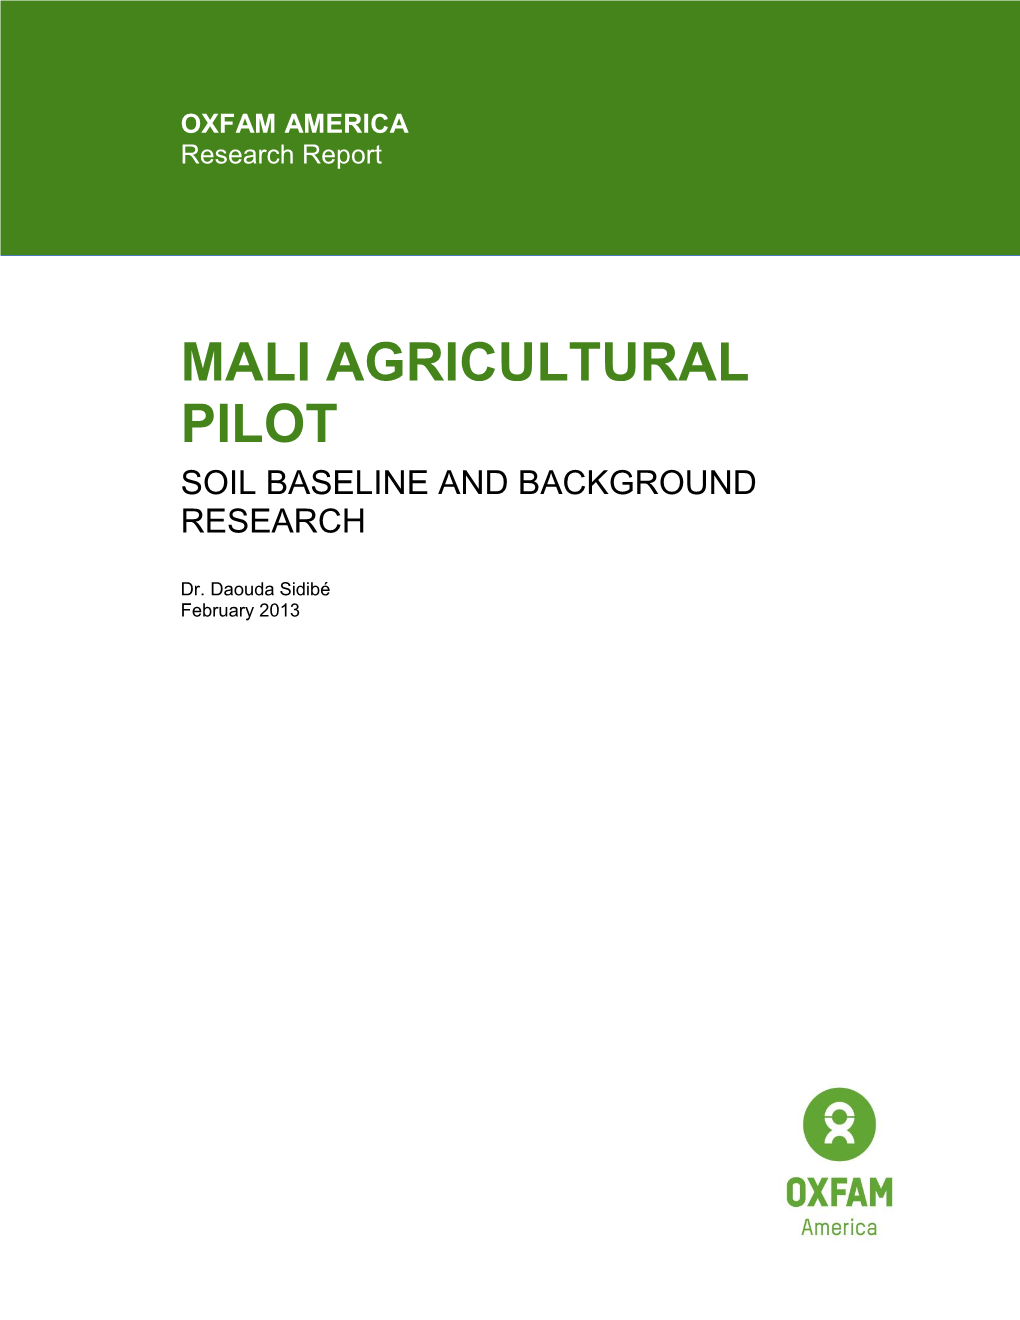 Mali Agricultural Pilot Soil Baseline and Background Research